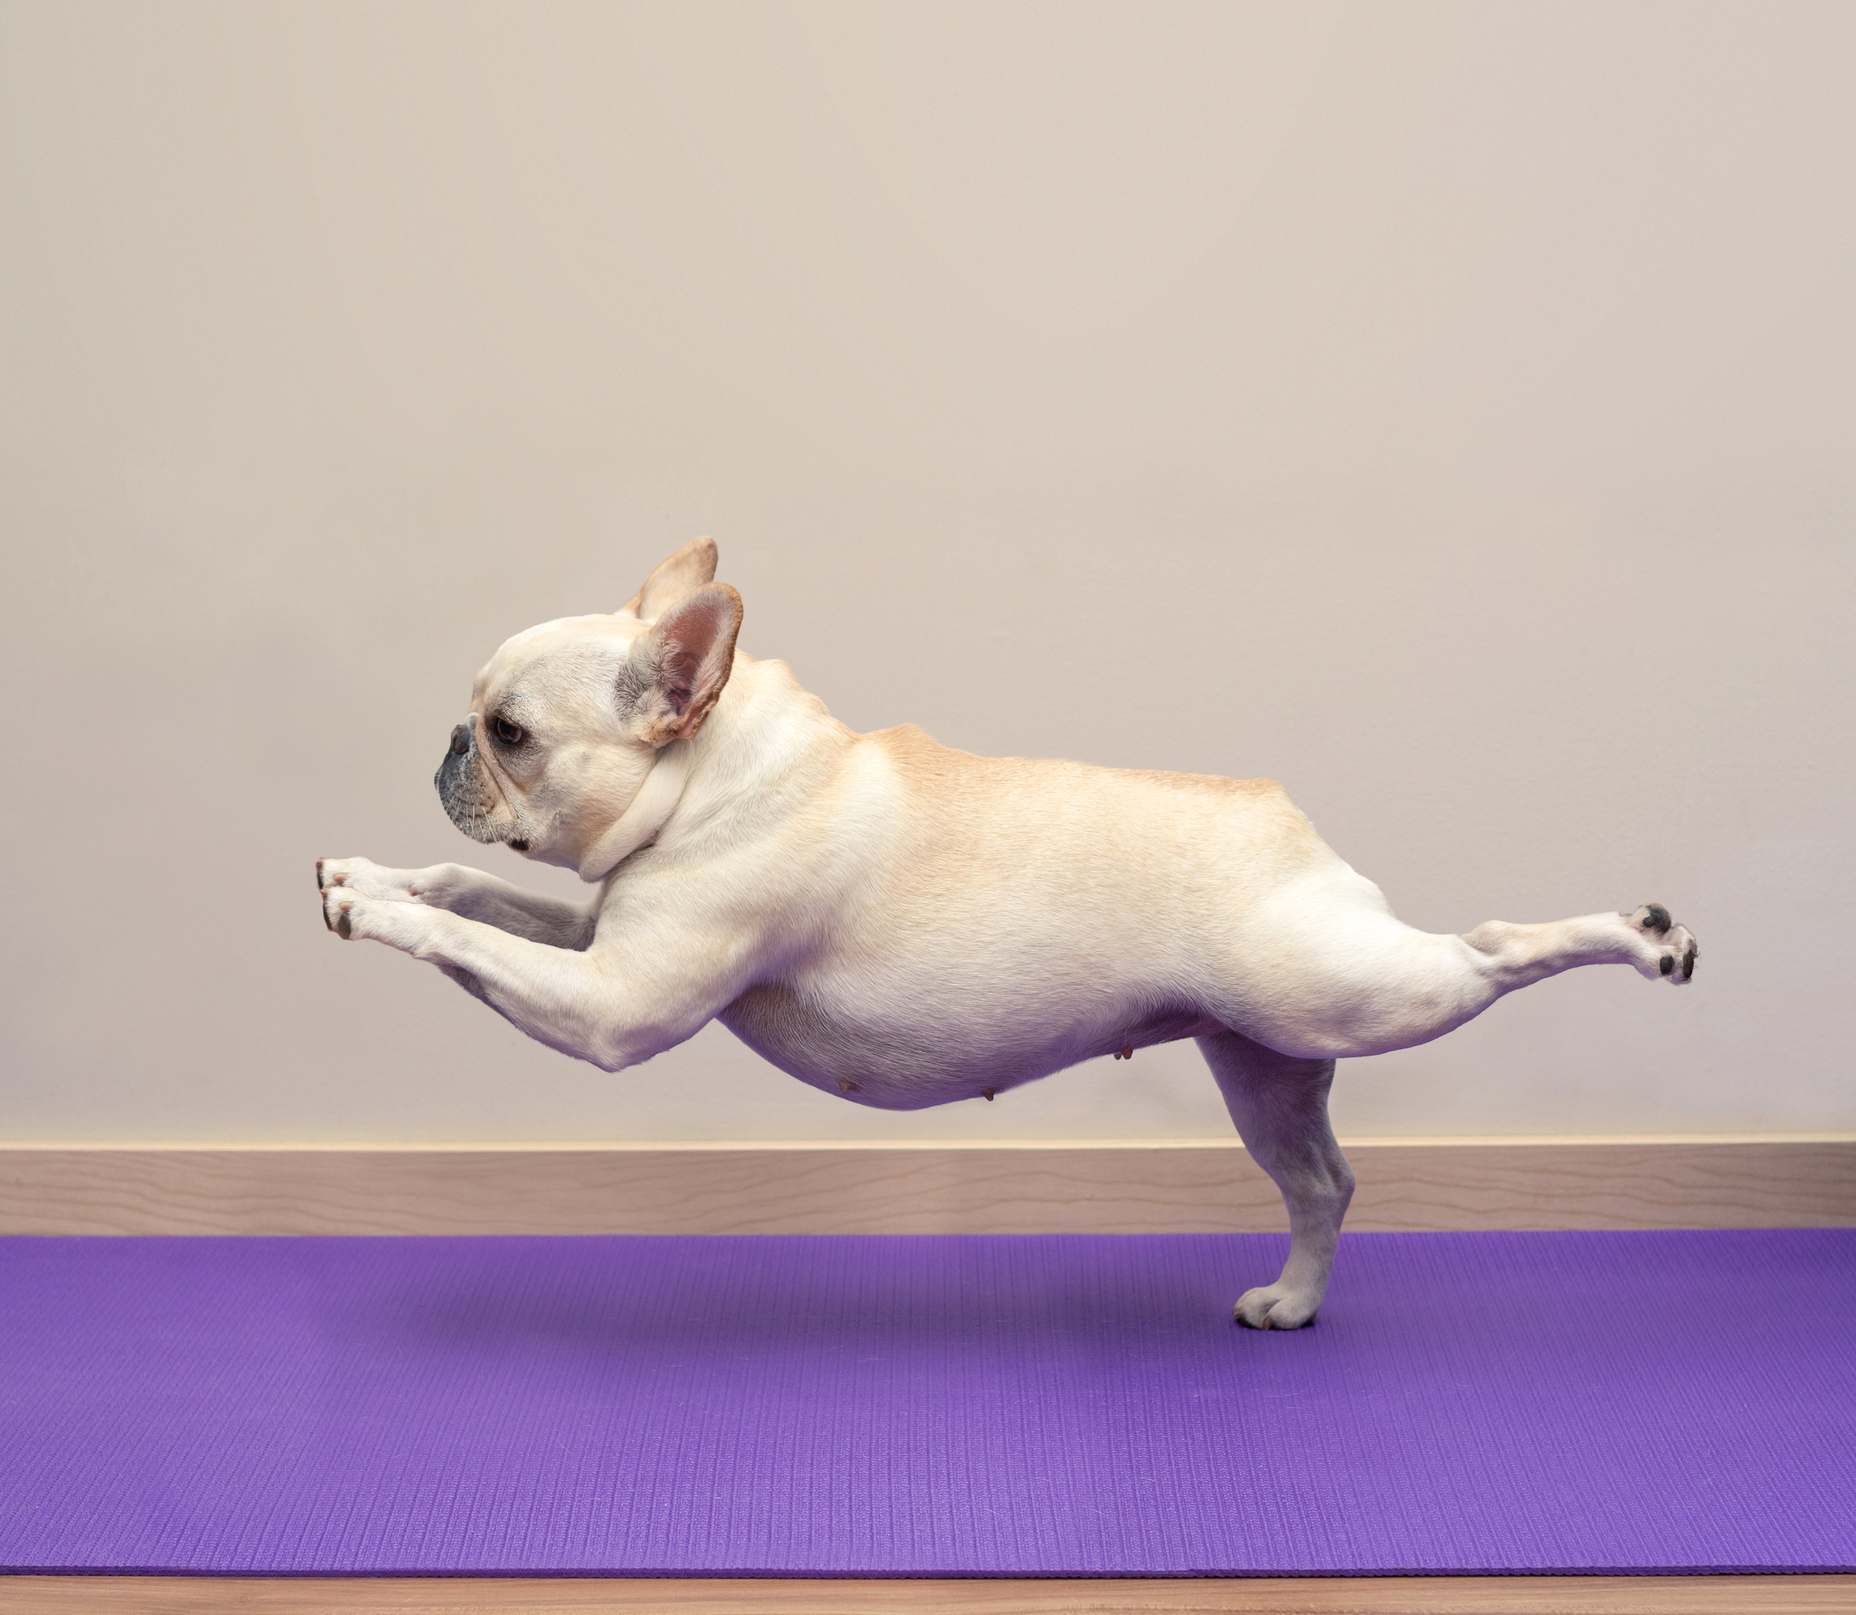 Why are So Many Yoga Poses Named after Animals? - Yoga Fever